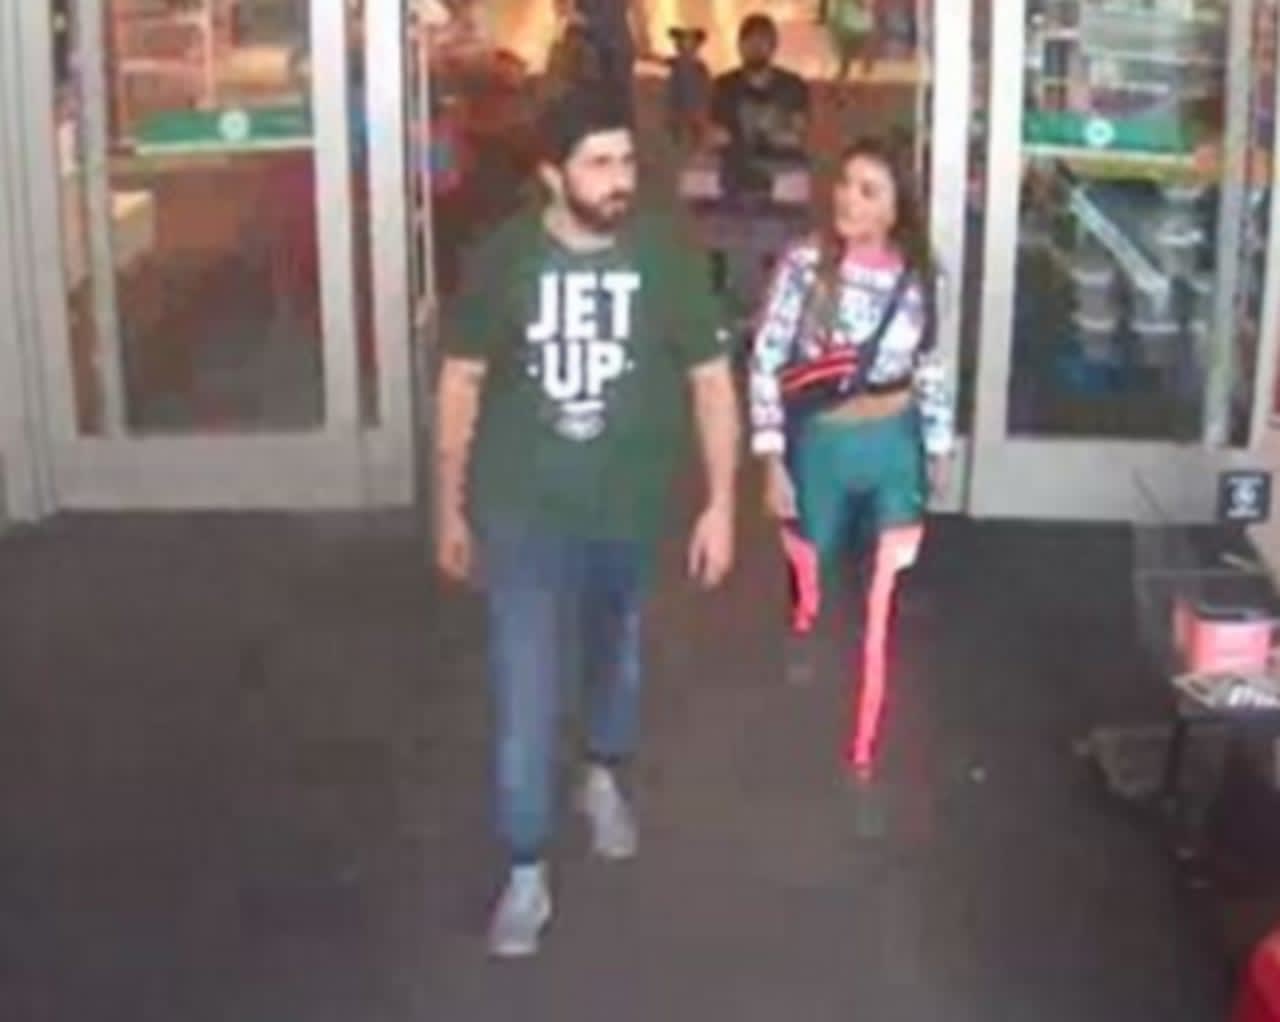 Police are on the lookout for a man and woman suspected of stealing JBL headphones from Target in Huntington Station (124 E. Jericho Turnpike) on Sunday, Sept. 22 around 5:20 p.m.